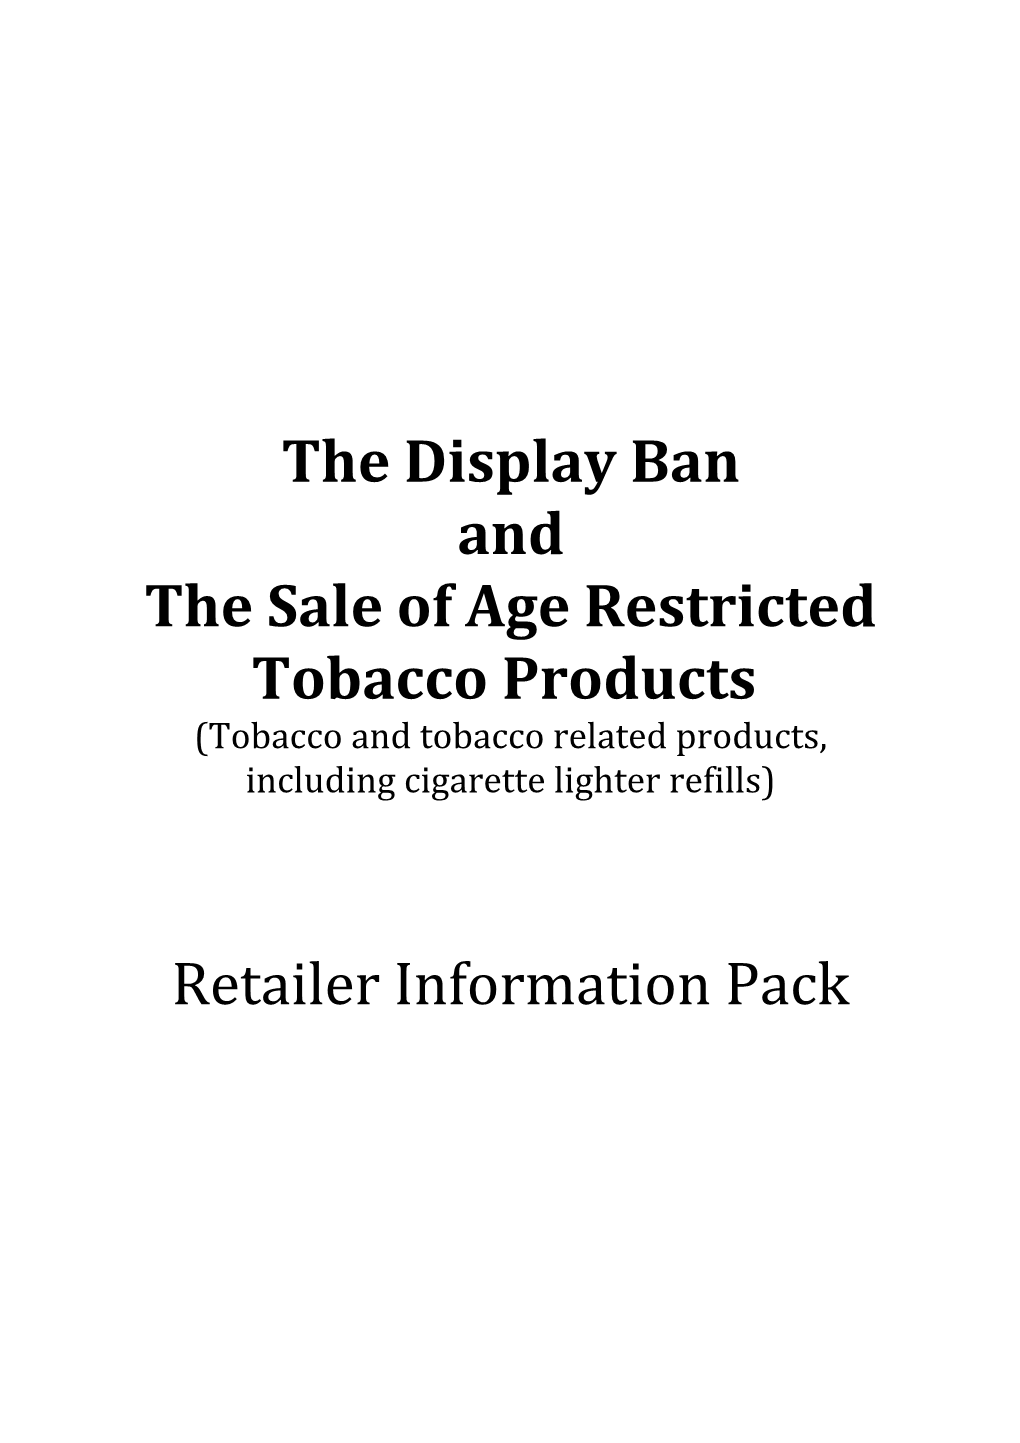 The Sale of Age Restricted Tobacco Products